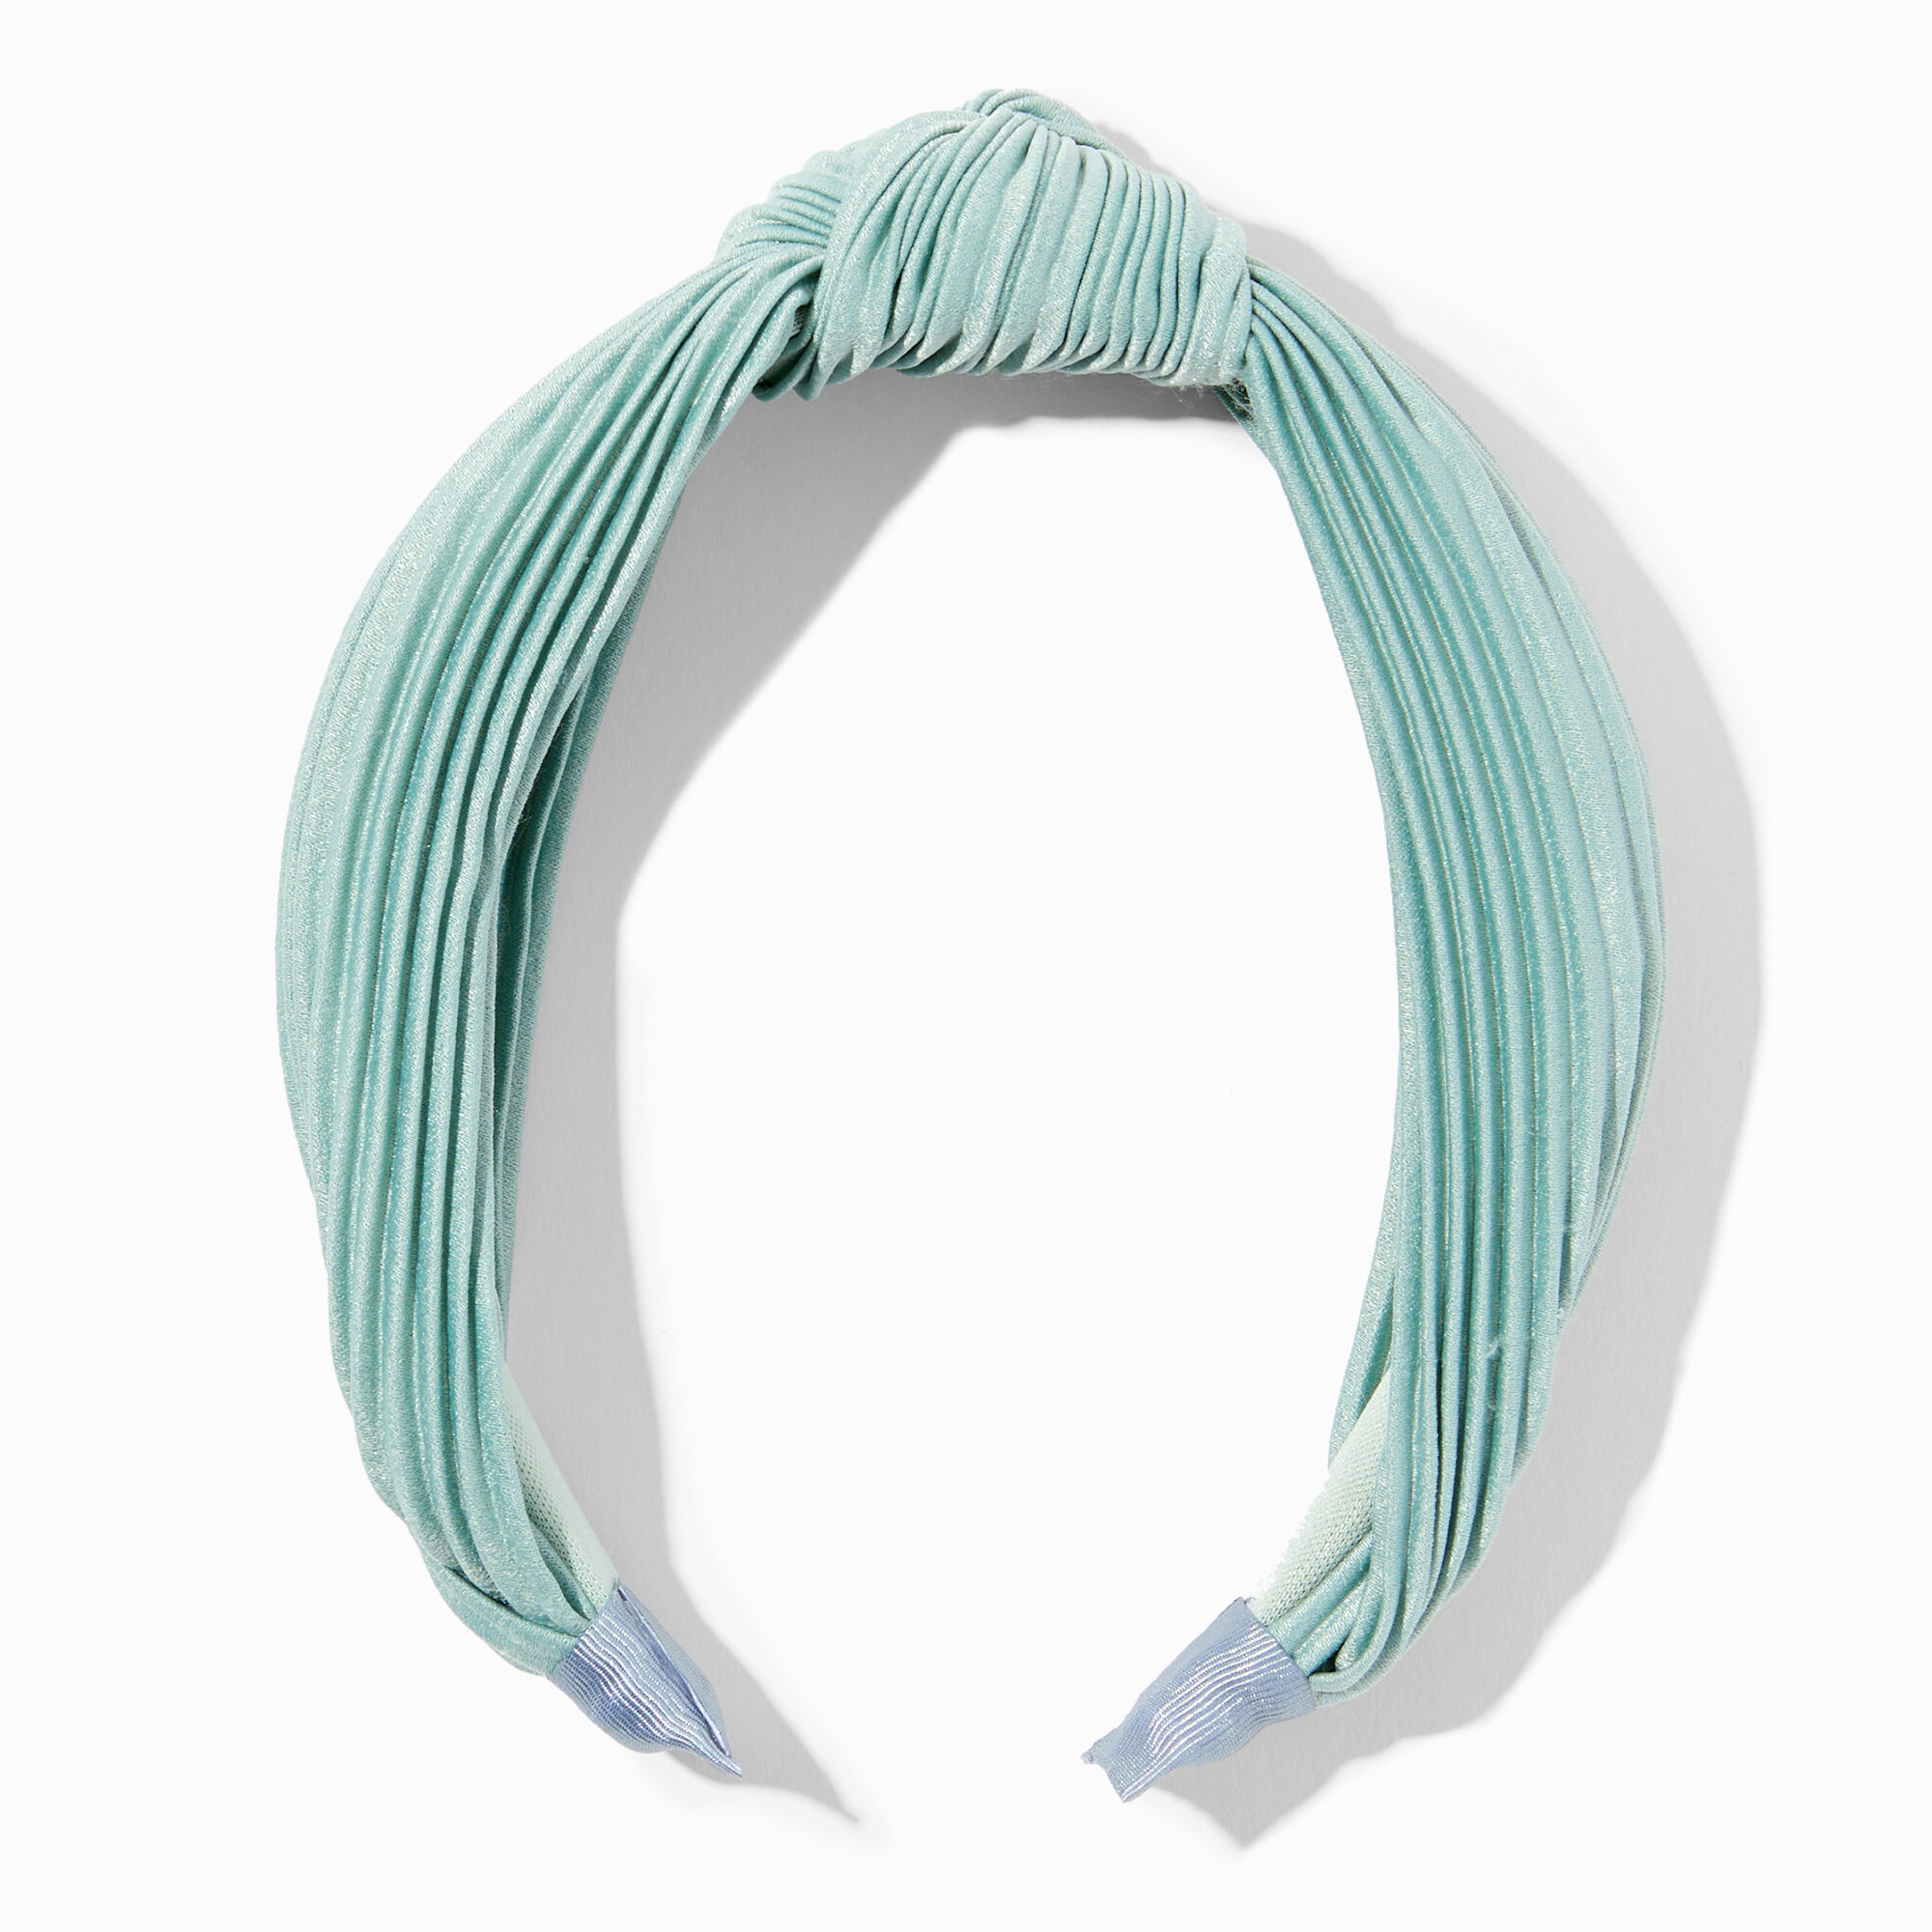 View Claires Sage Pleated Knotted Headband Green information